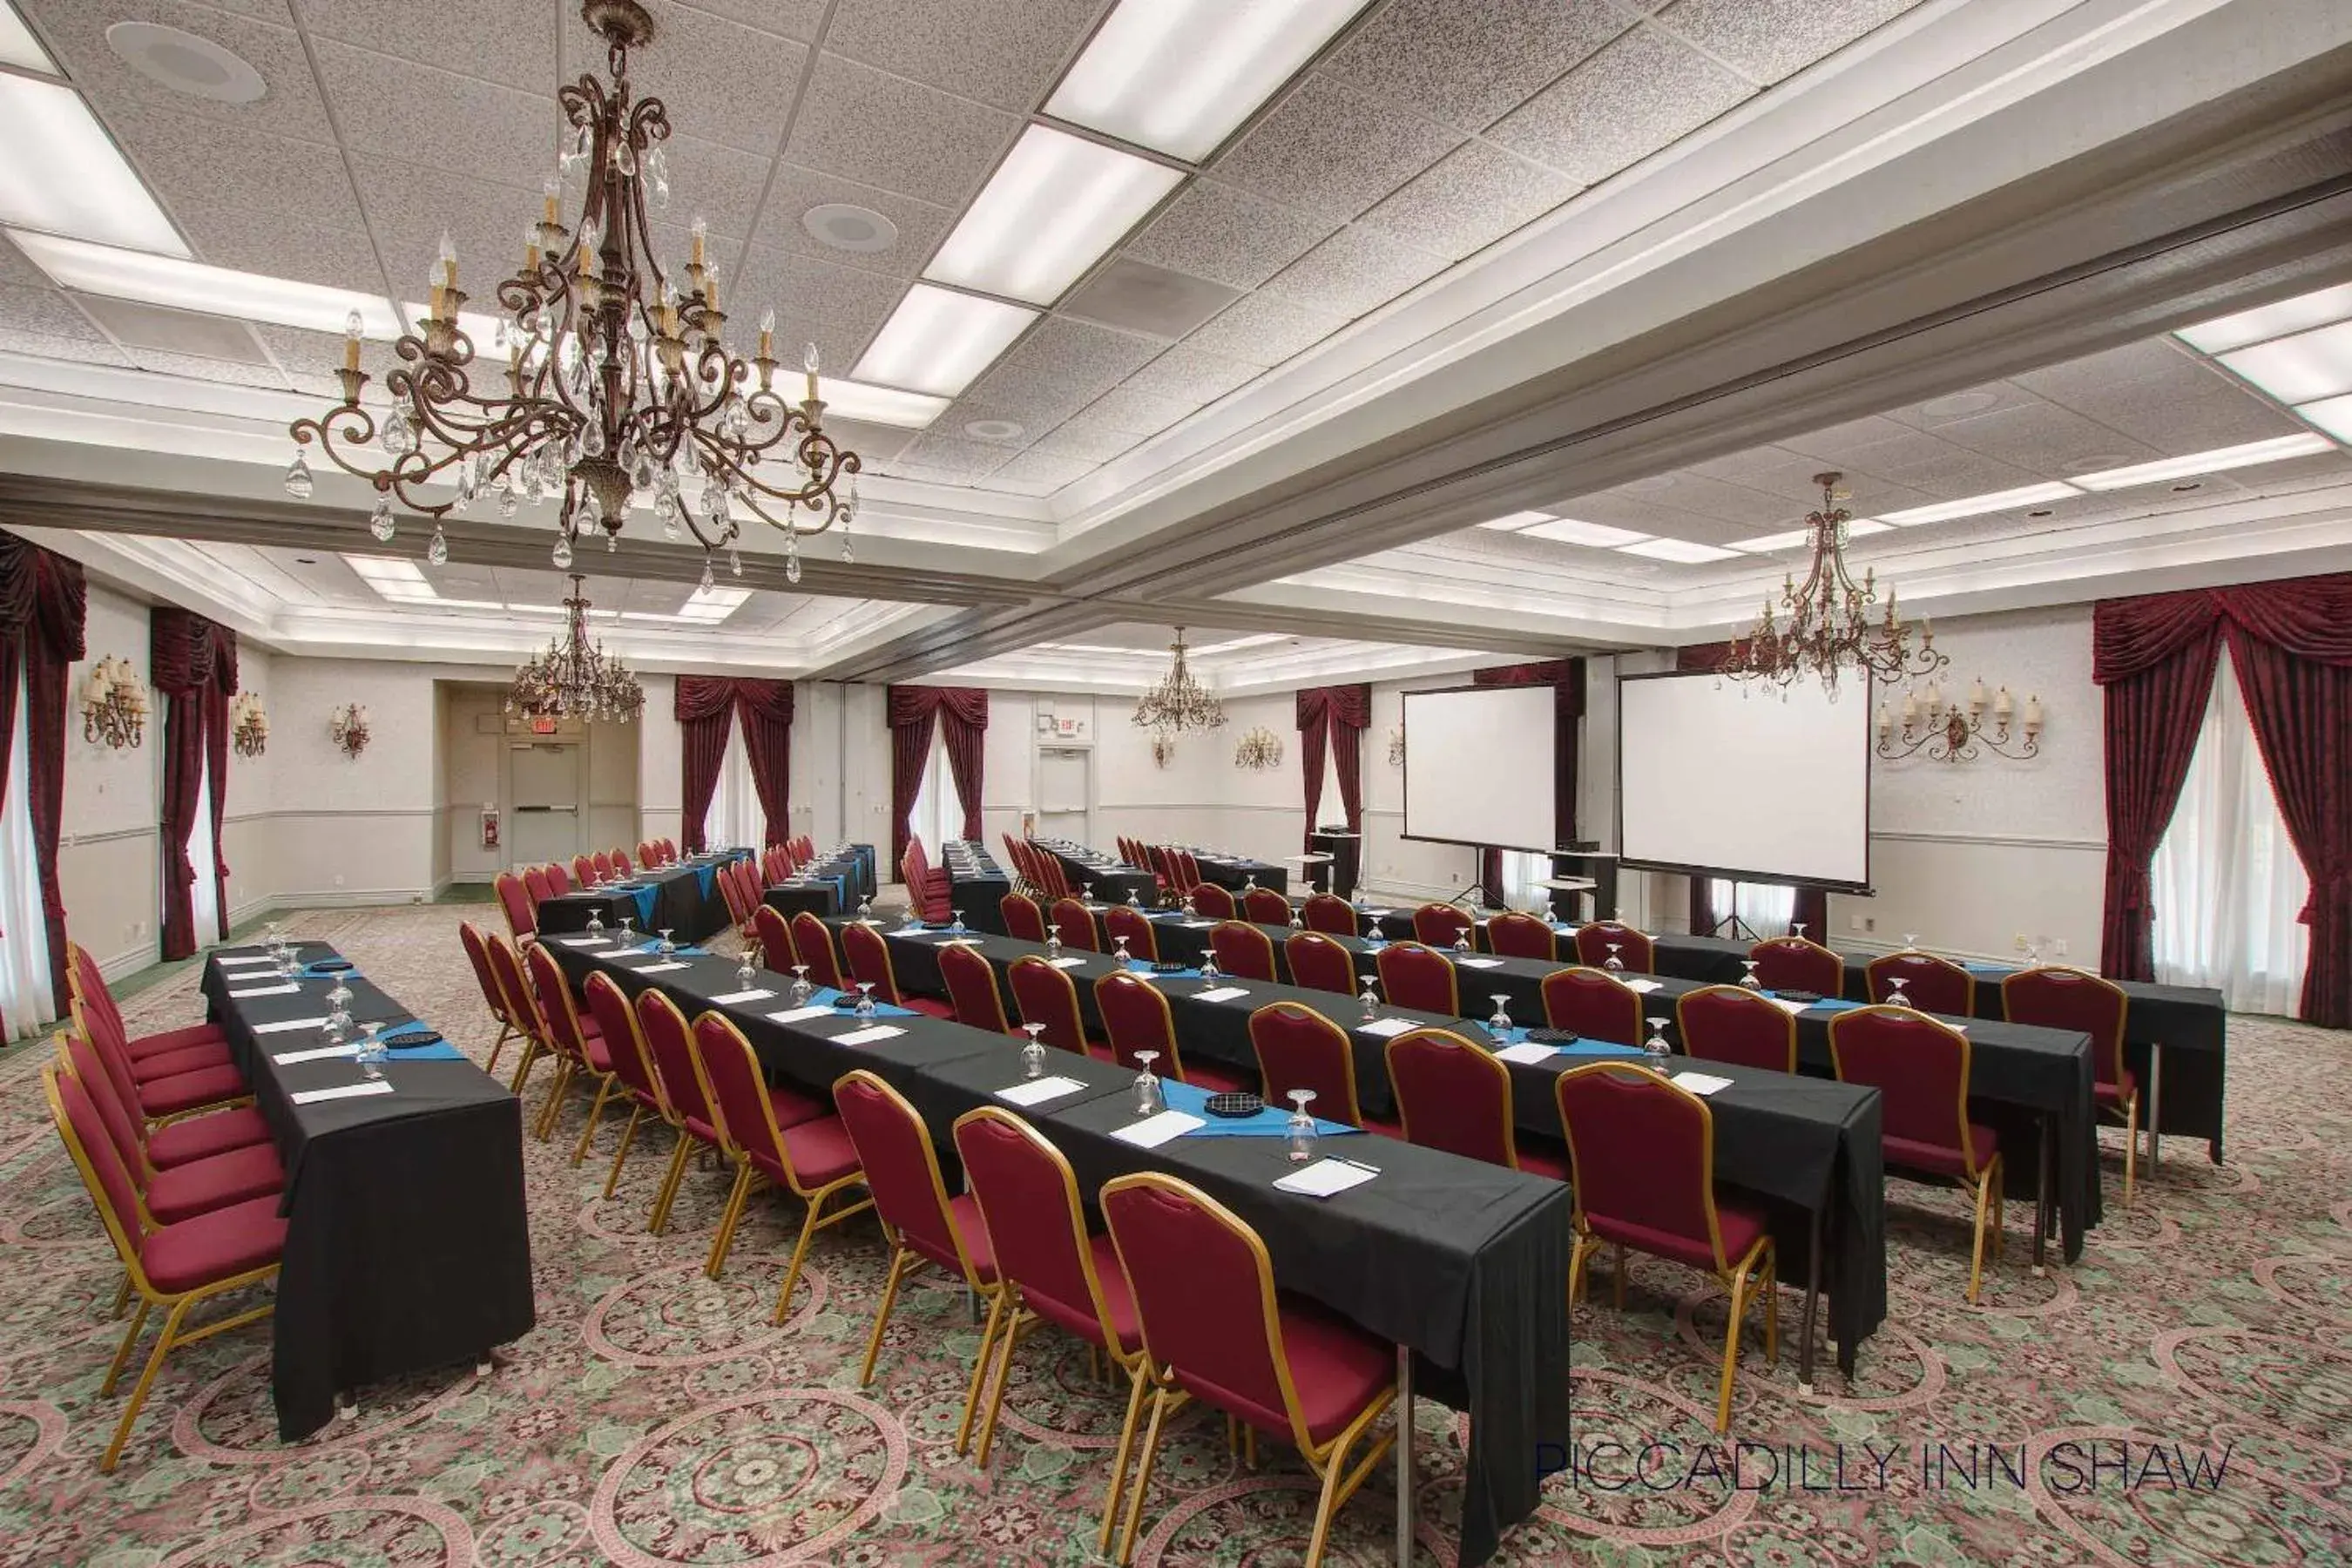 Banquet/Function facilities, Business Area/Conference Room in Piccadilly Inn Shaw